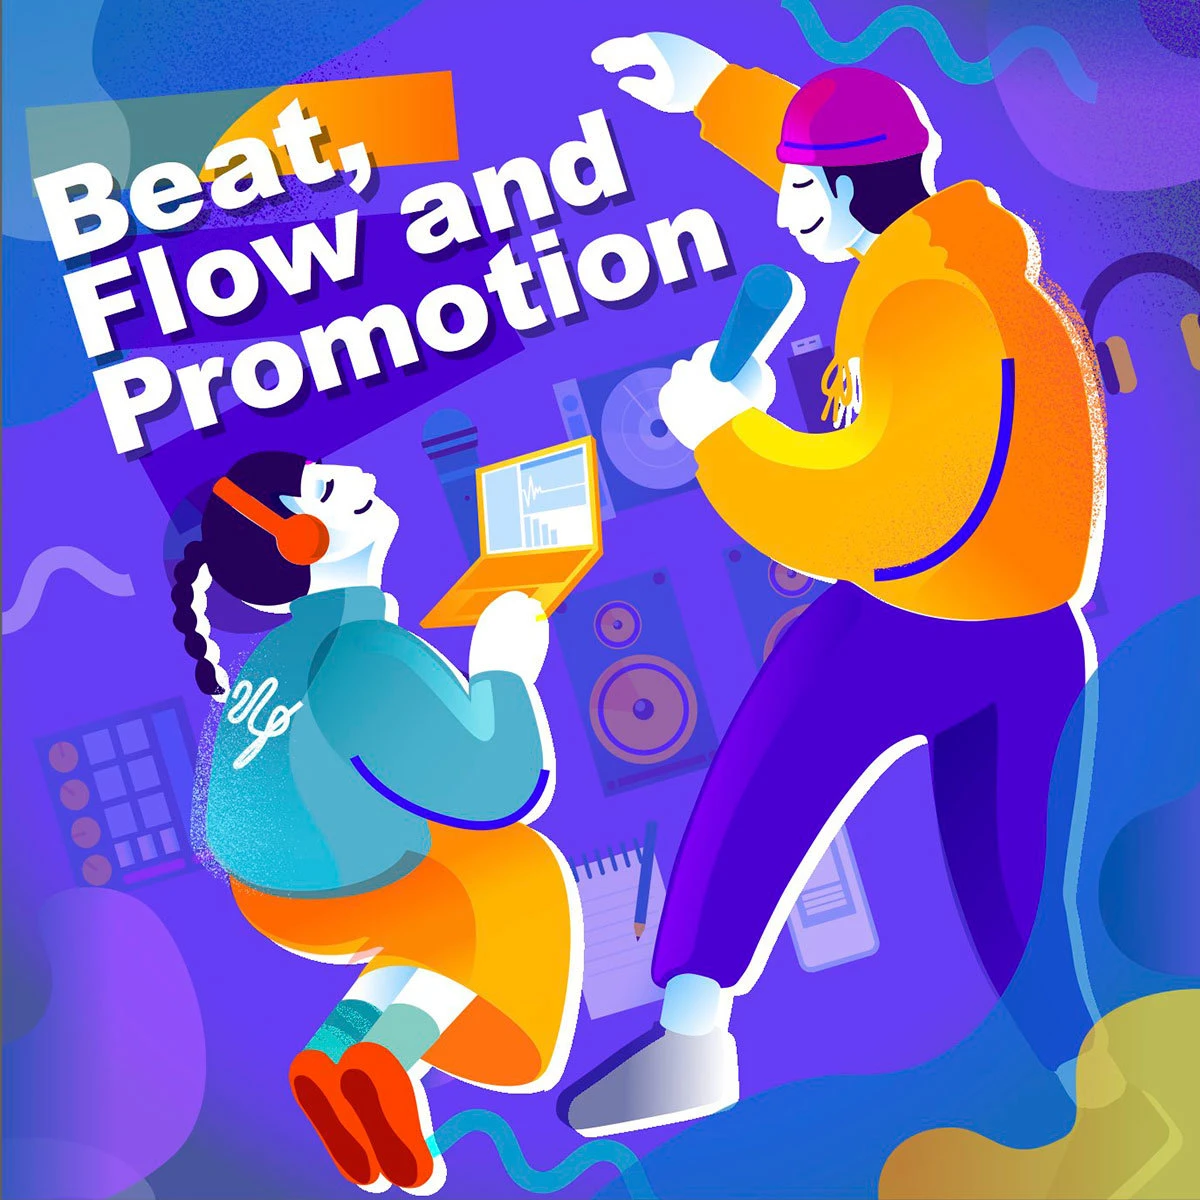 「Beat, Flow and Promotion」